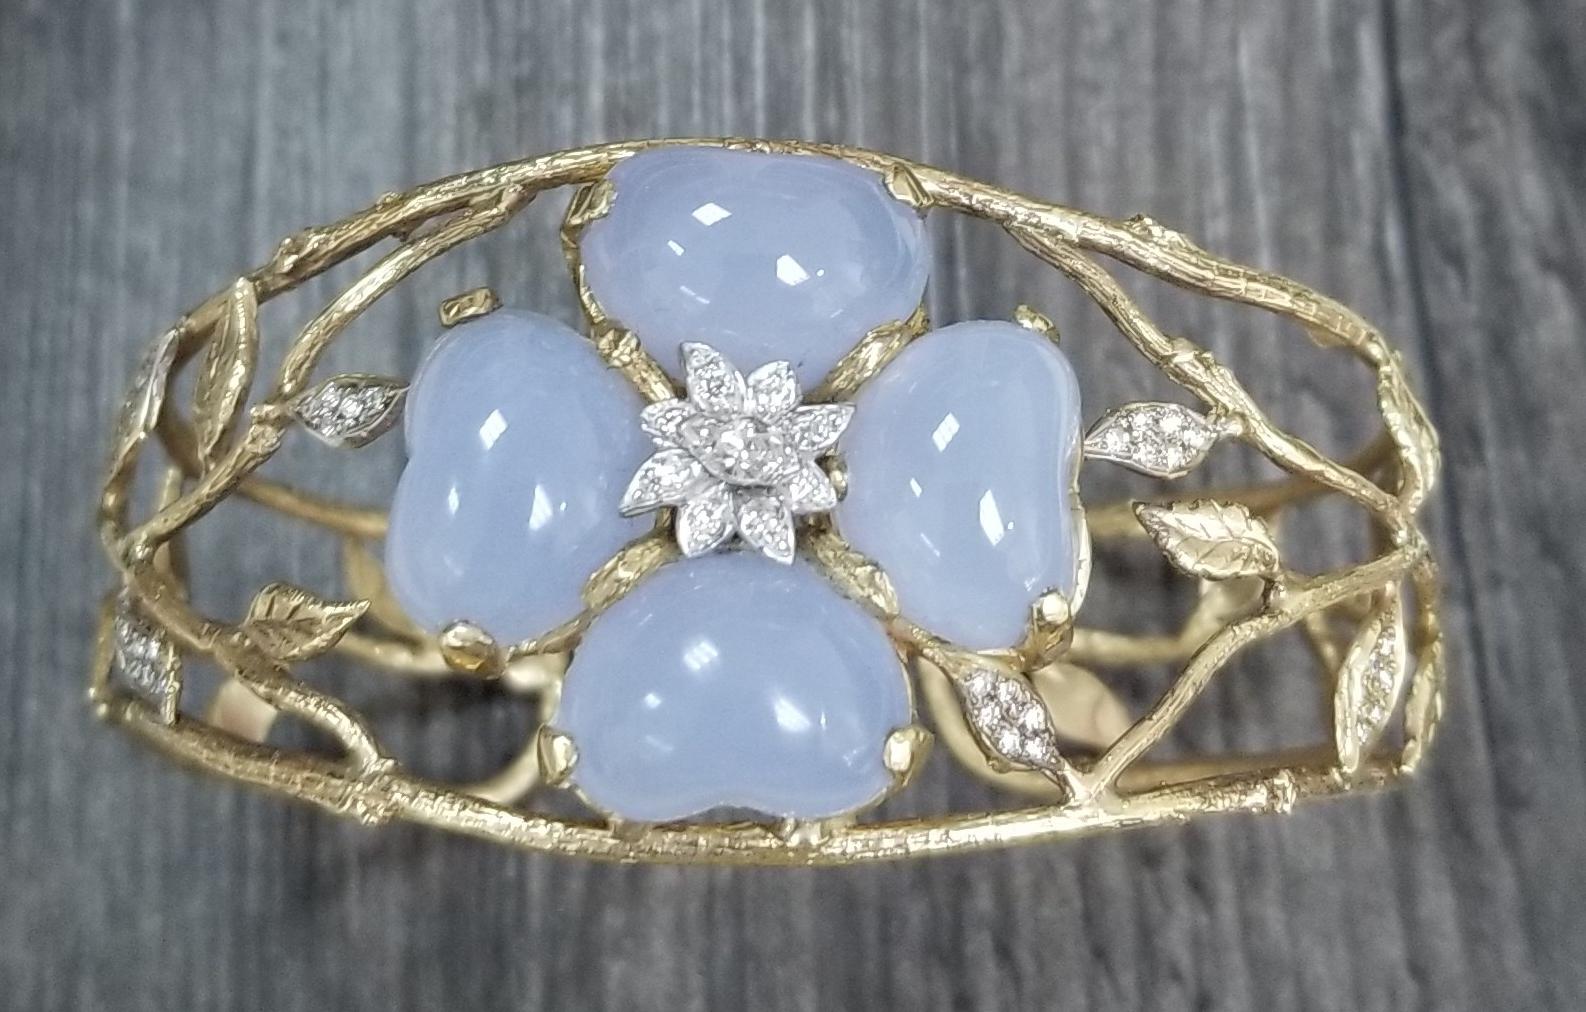 14k yellow gold with 4 heart shape cut cabochon Blue Chalcedony weighing 29.05cts. and 28 round full cut diamonds weighing .28pts. and 1 marquise cut diamond weighing .13pts. set in a hand made 